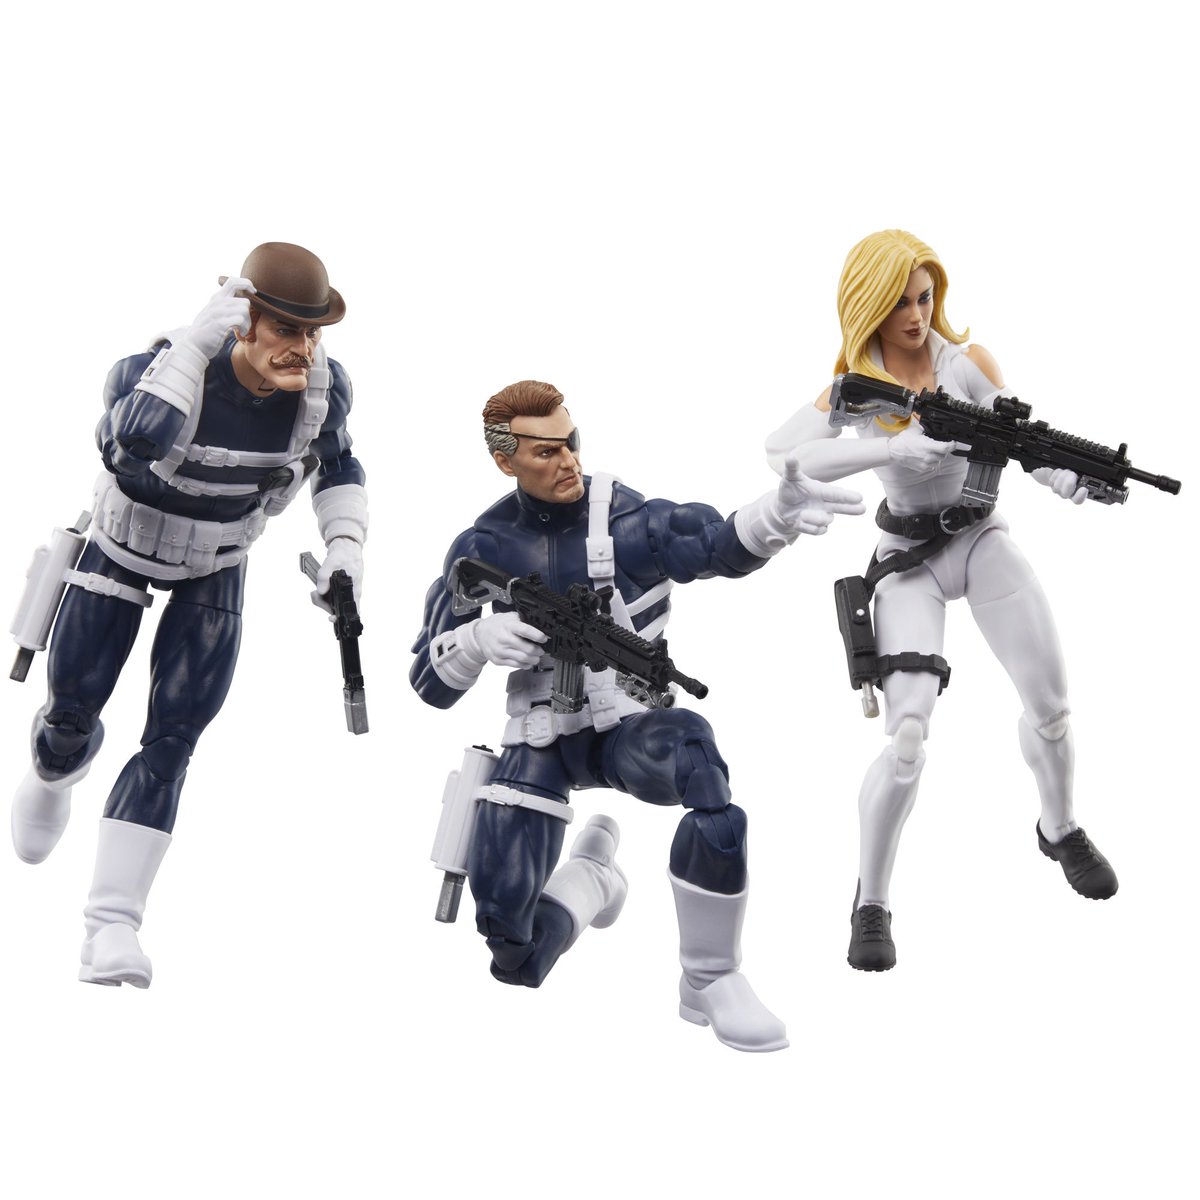 Shield 3-pack goes up for preorder next Tuesday at fan channel retailers like Hasbro Pulse. Have a great weekend! Get some legends